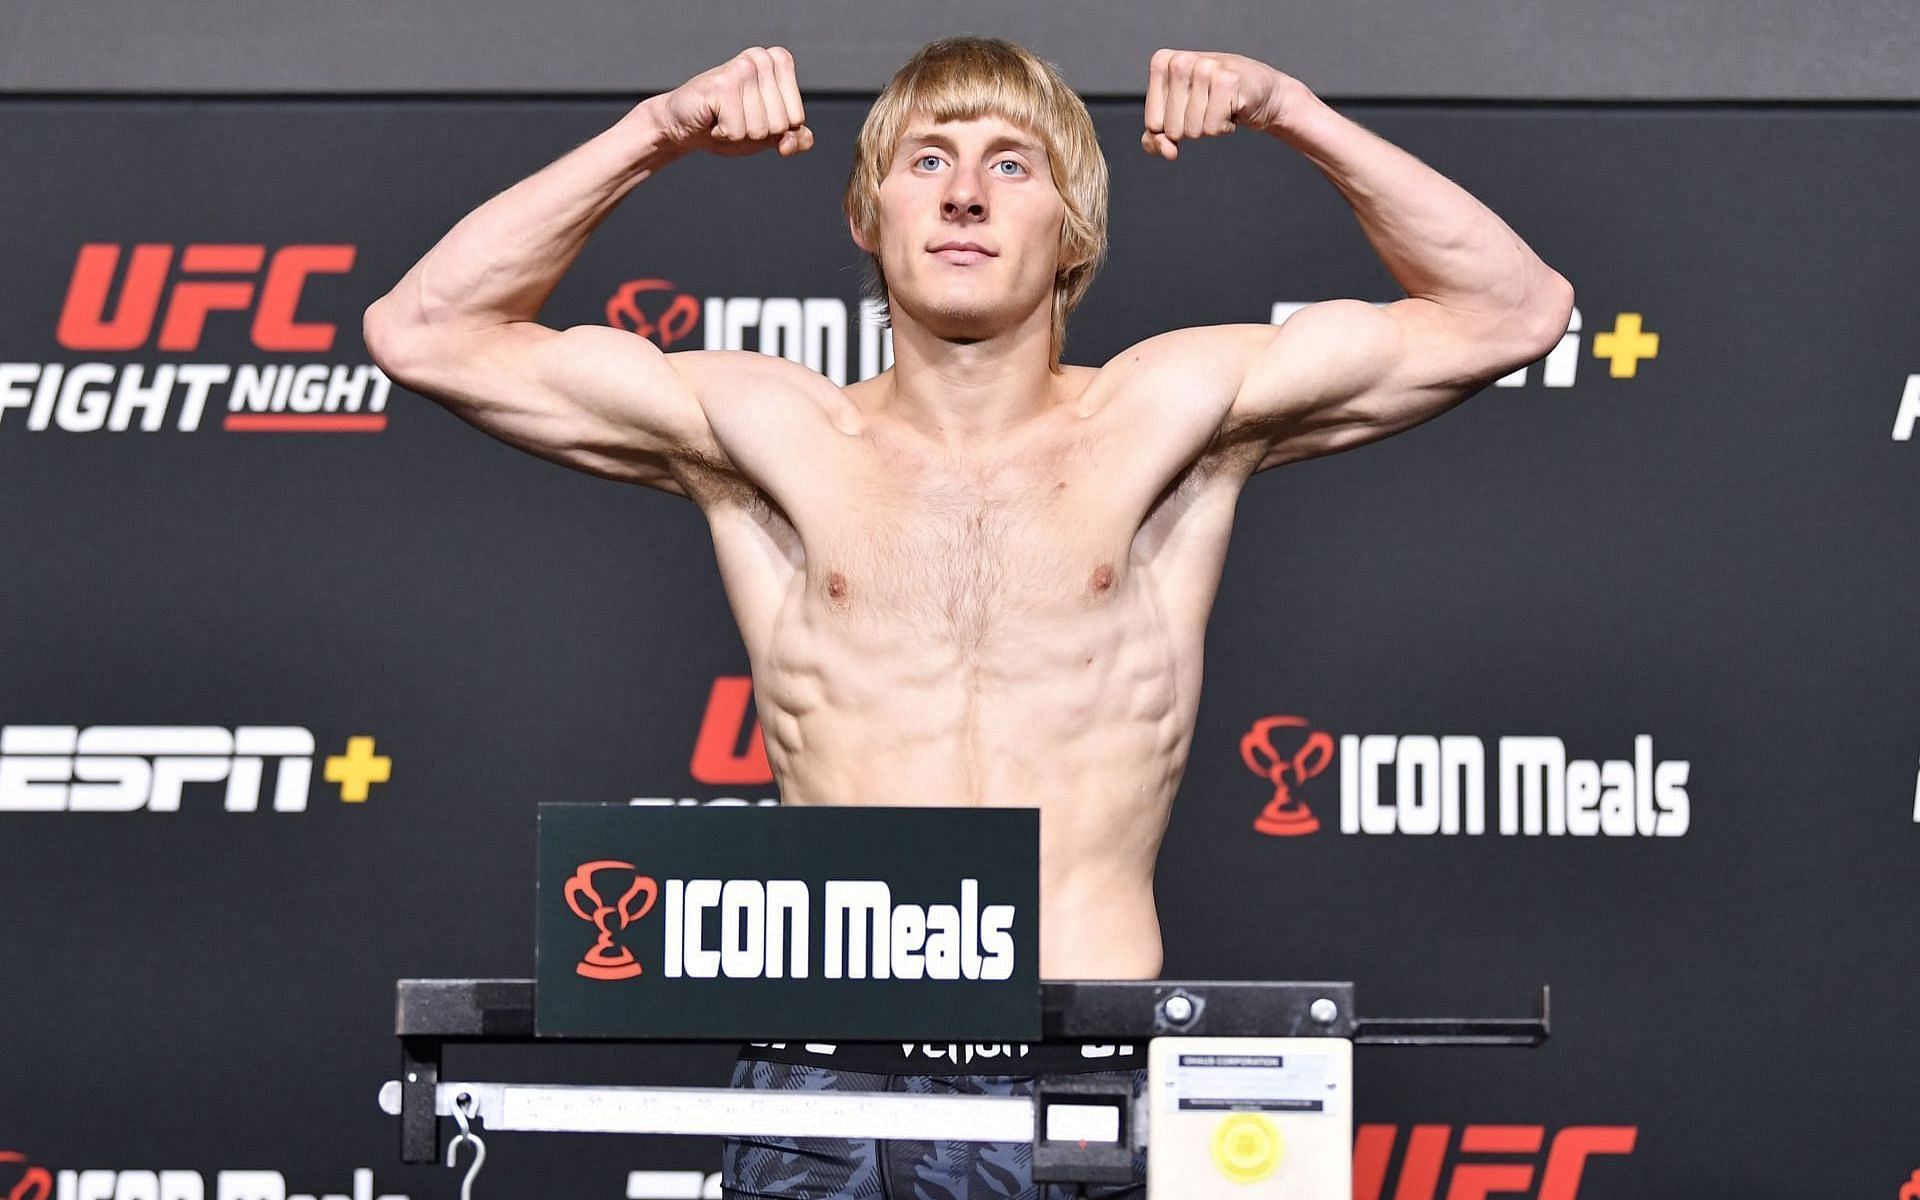 Paddy Pimblett confirms that he is planning on being part of the UFC London fight card in March